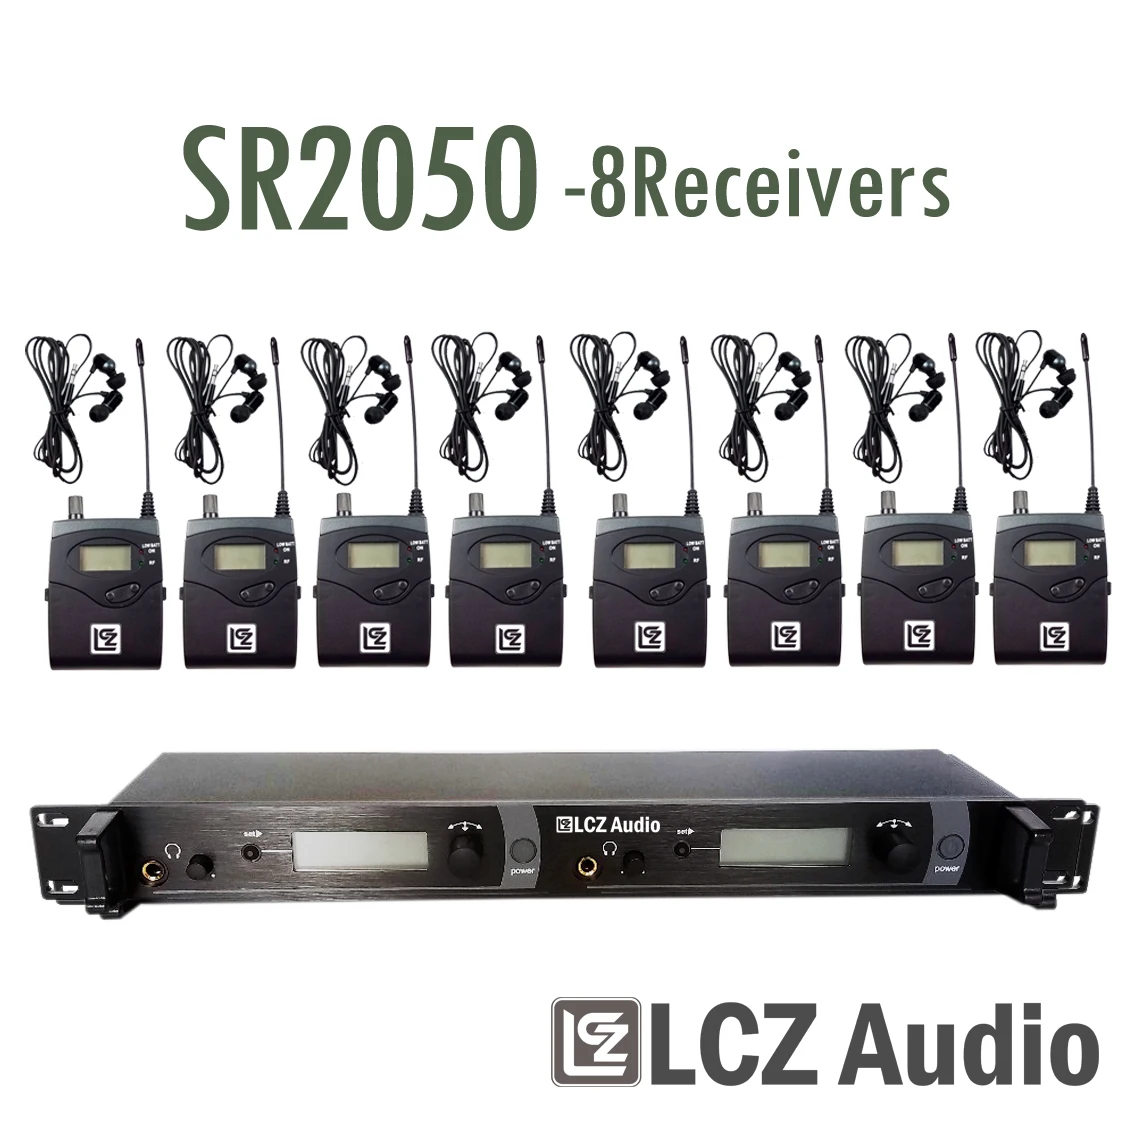 

LCZ AUDIO Wireless Stage Monitoring System SR2050 IEM In-Ear Stage Wireless Monitor System 1 Transmitter 8 Receivers